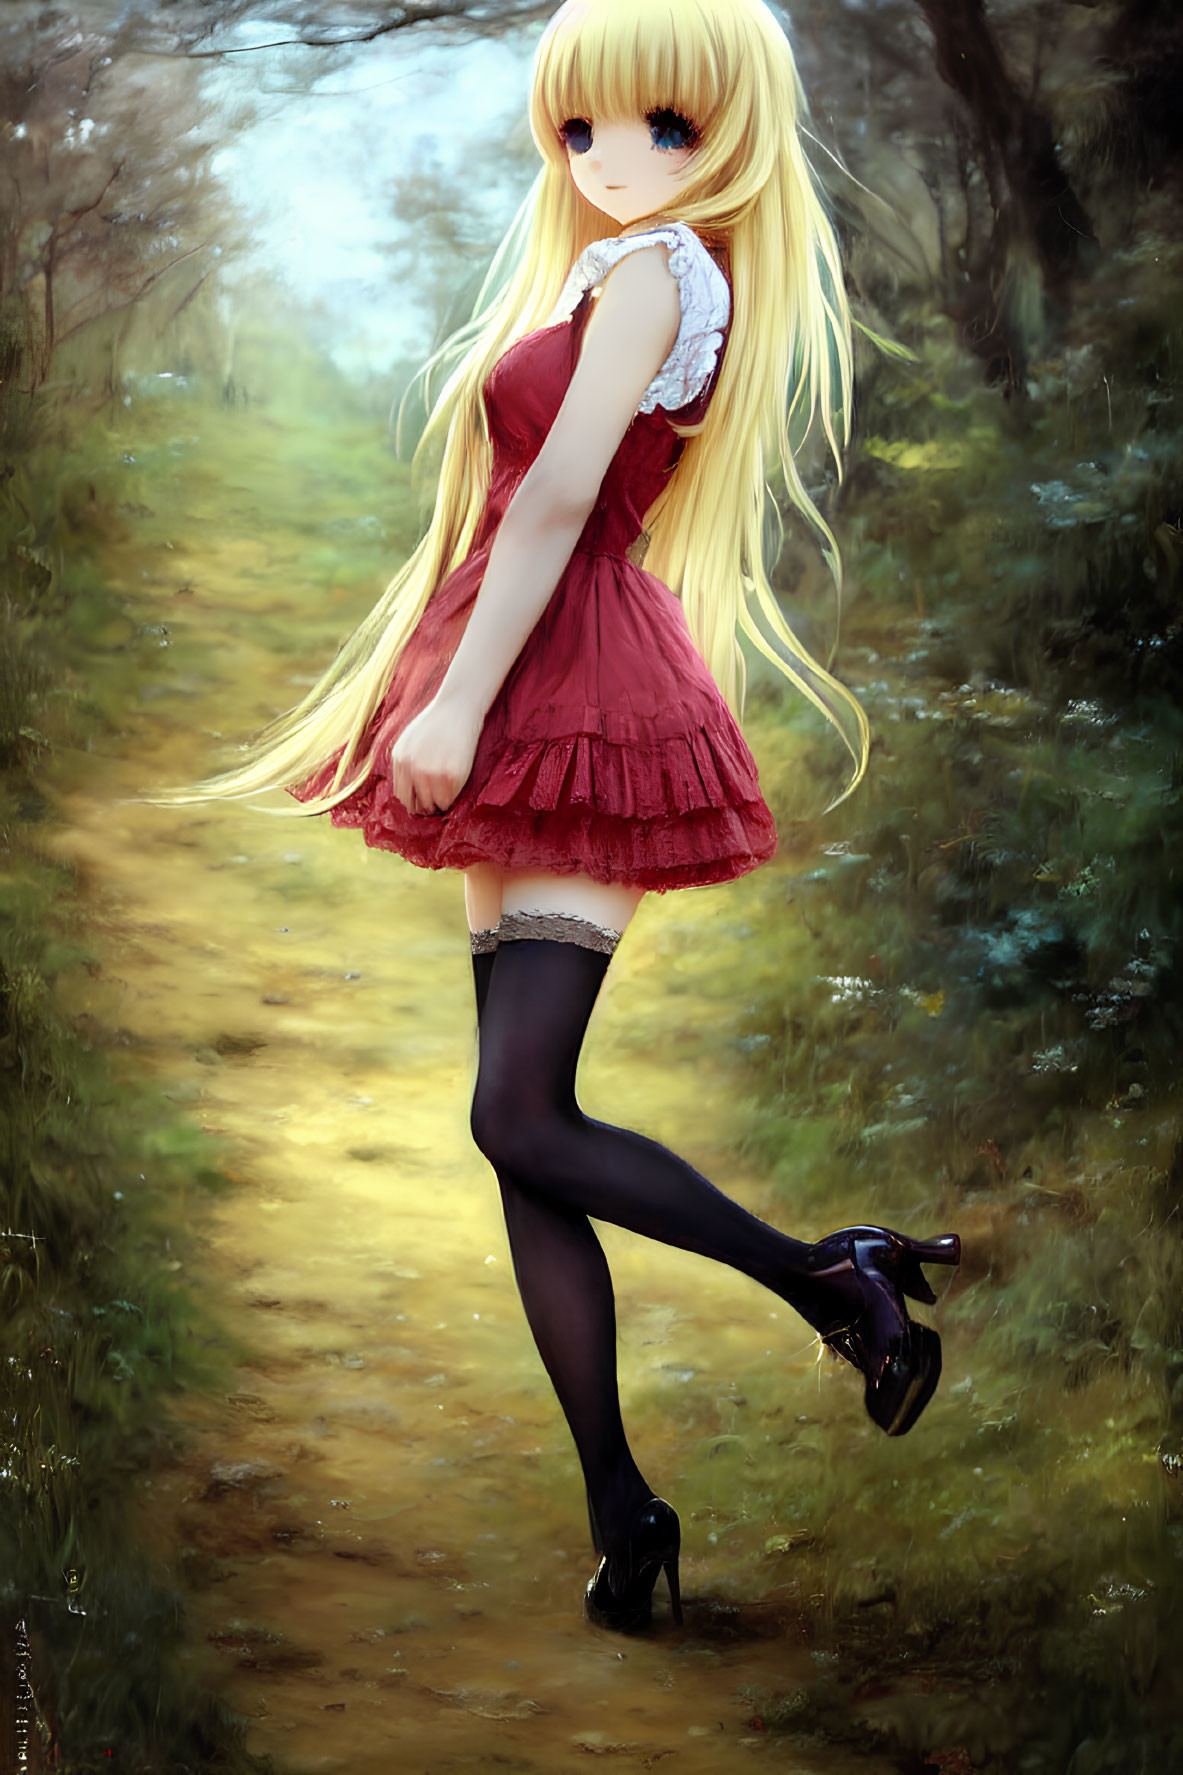 Blonde girl in red dress and black stockings walking in forest path